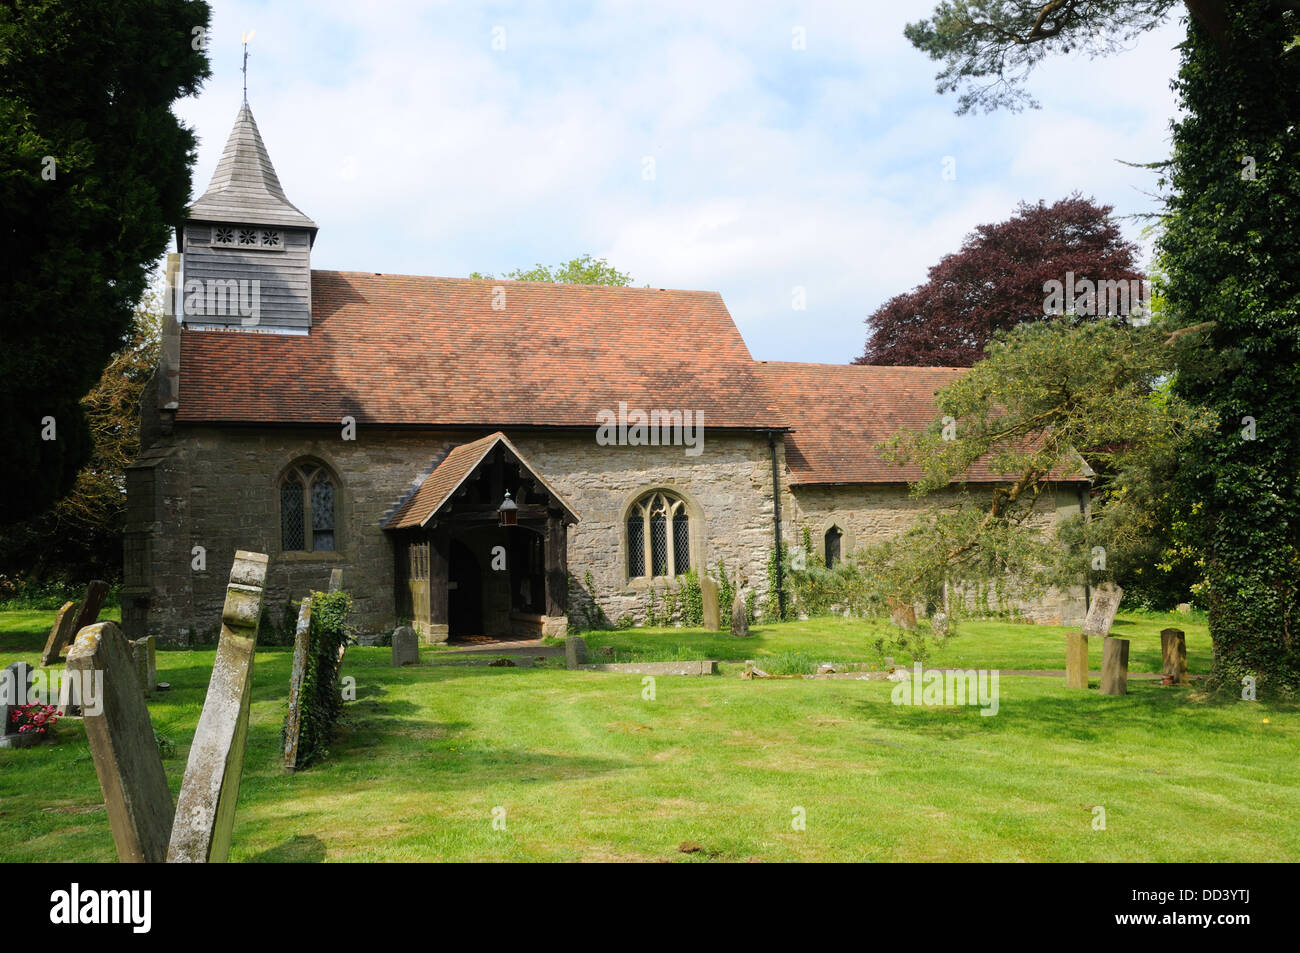 The Church of St. Mary the Virgin, in Wolverton, Warwickshire, England Stock Photo